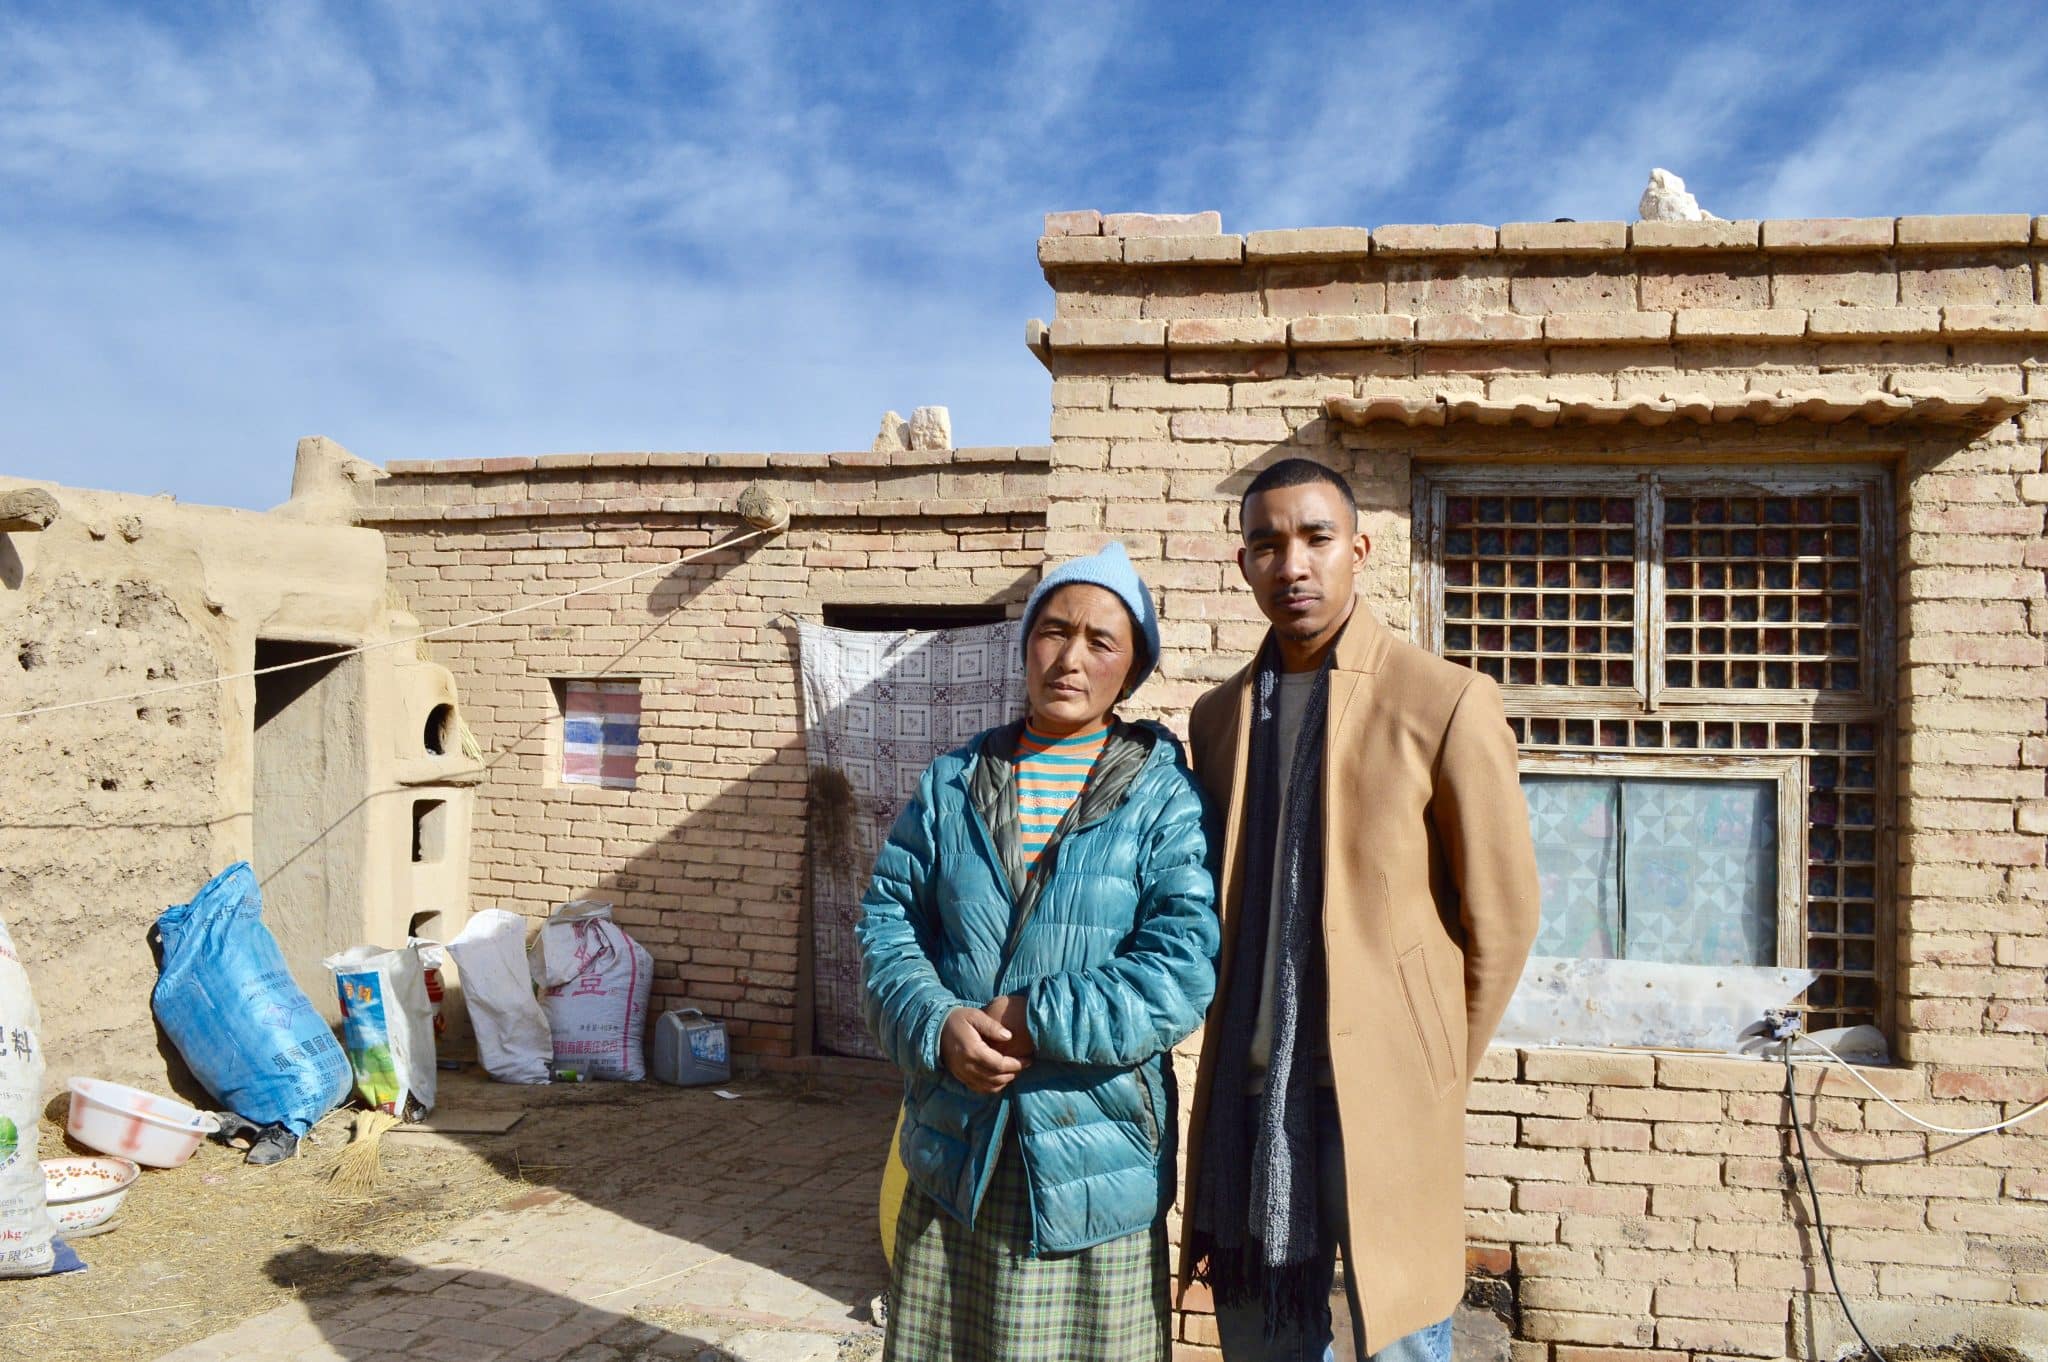 Tyreek with a woman in Central Asia